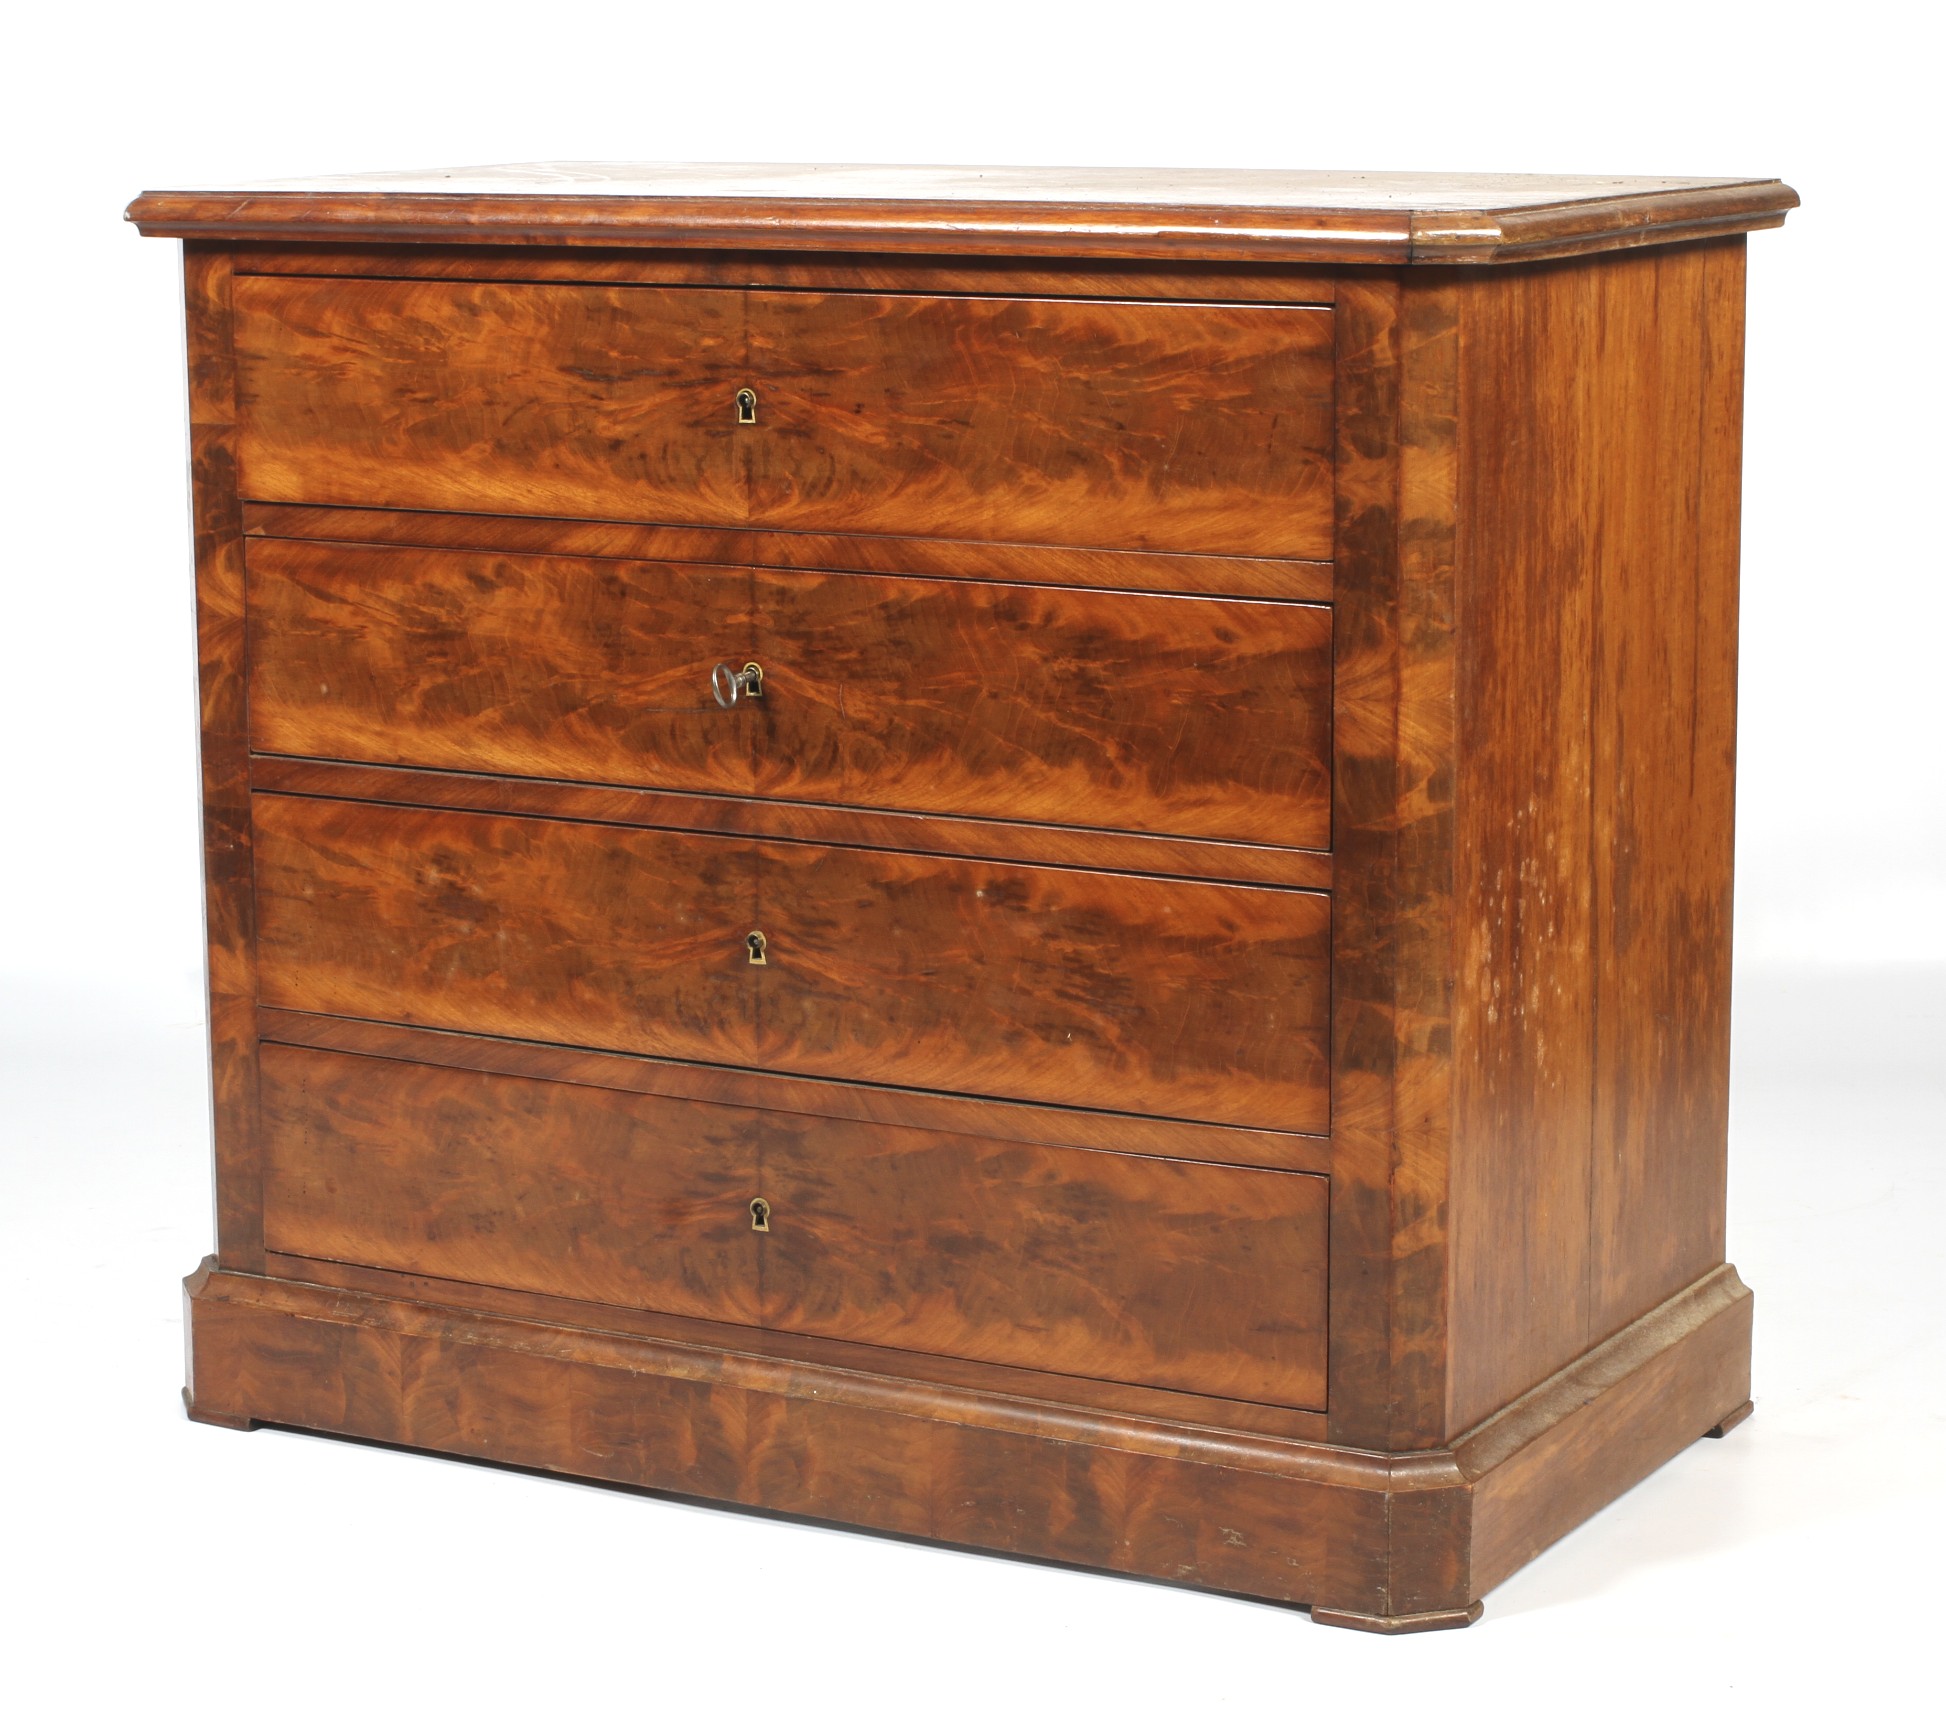 19th century Continental mahogany commode with four flame mahogany veneered drawers. L90cm x D48.